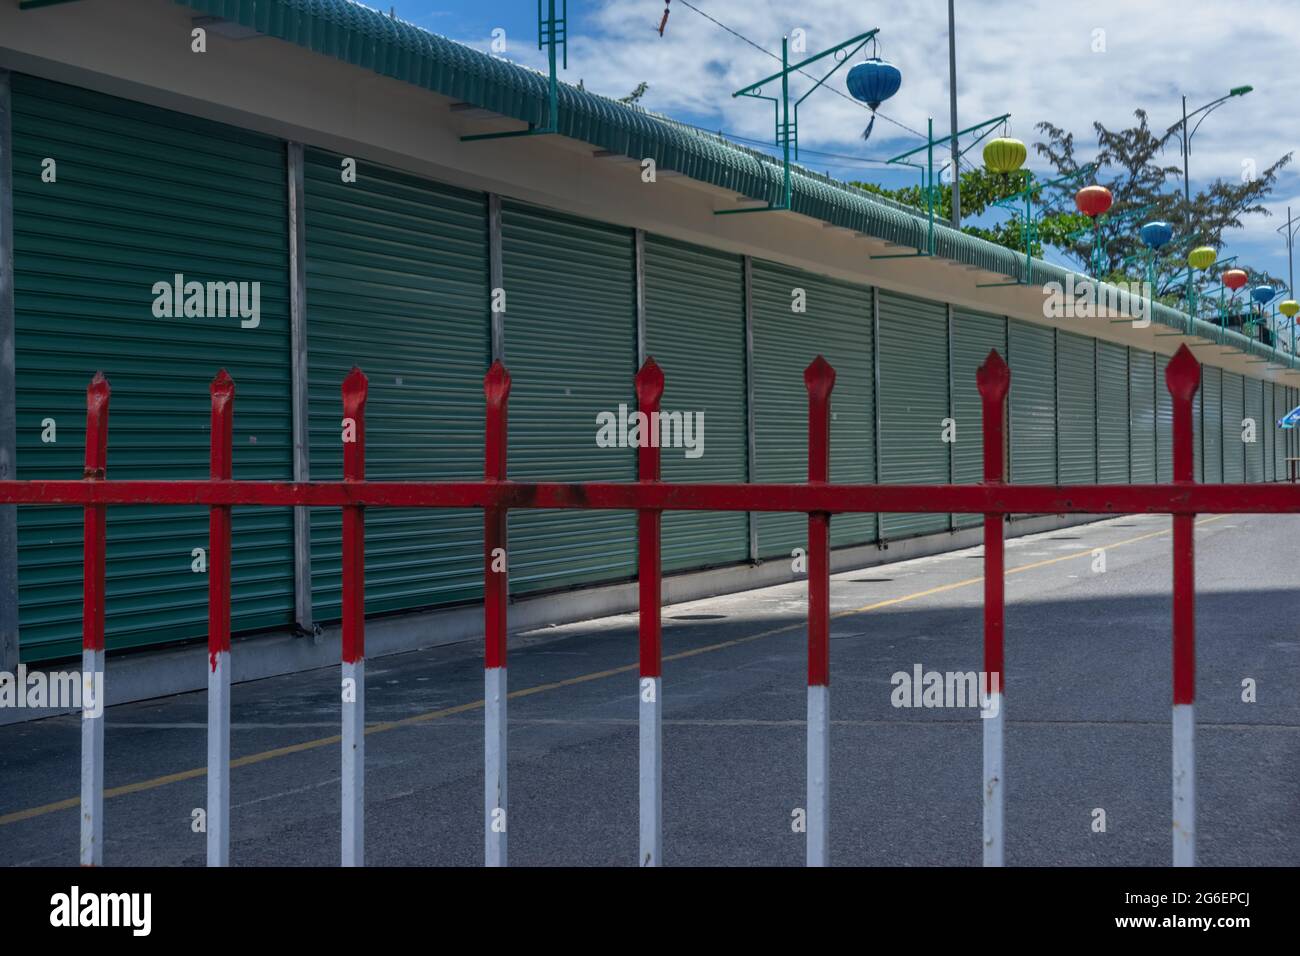 Metal barrier grid prohibit access to the street. Closed city area. Vietnam, Nha Trang. Stock Photo